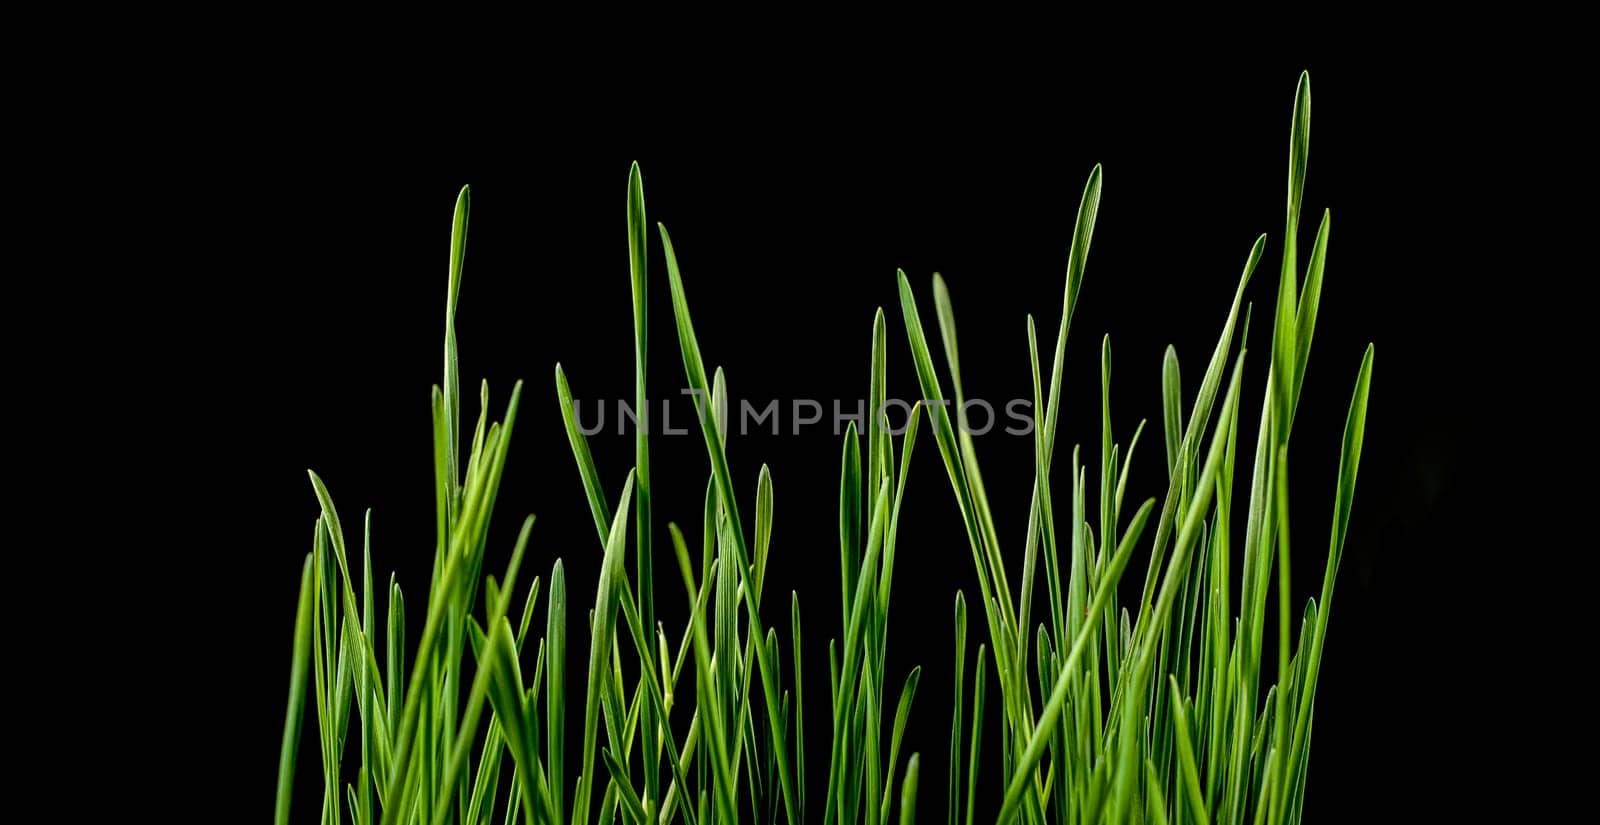 close up of green grass leaves against black background